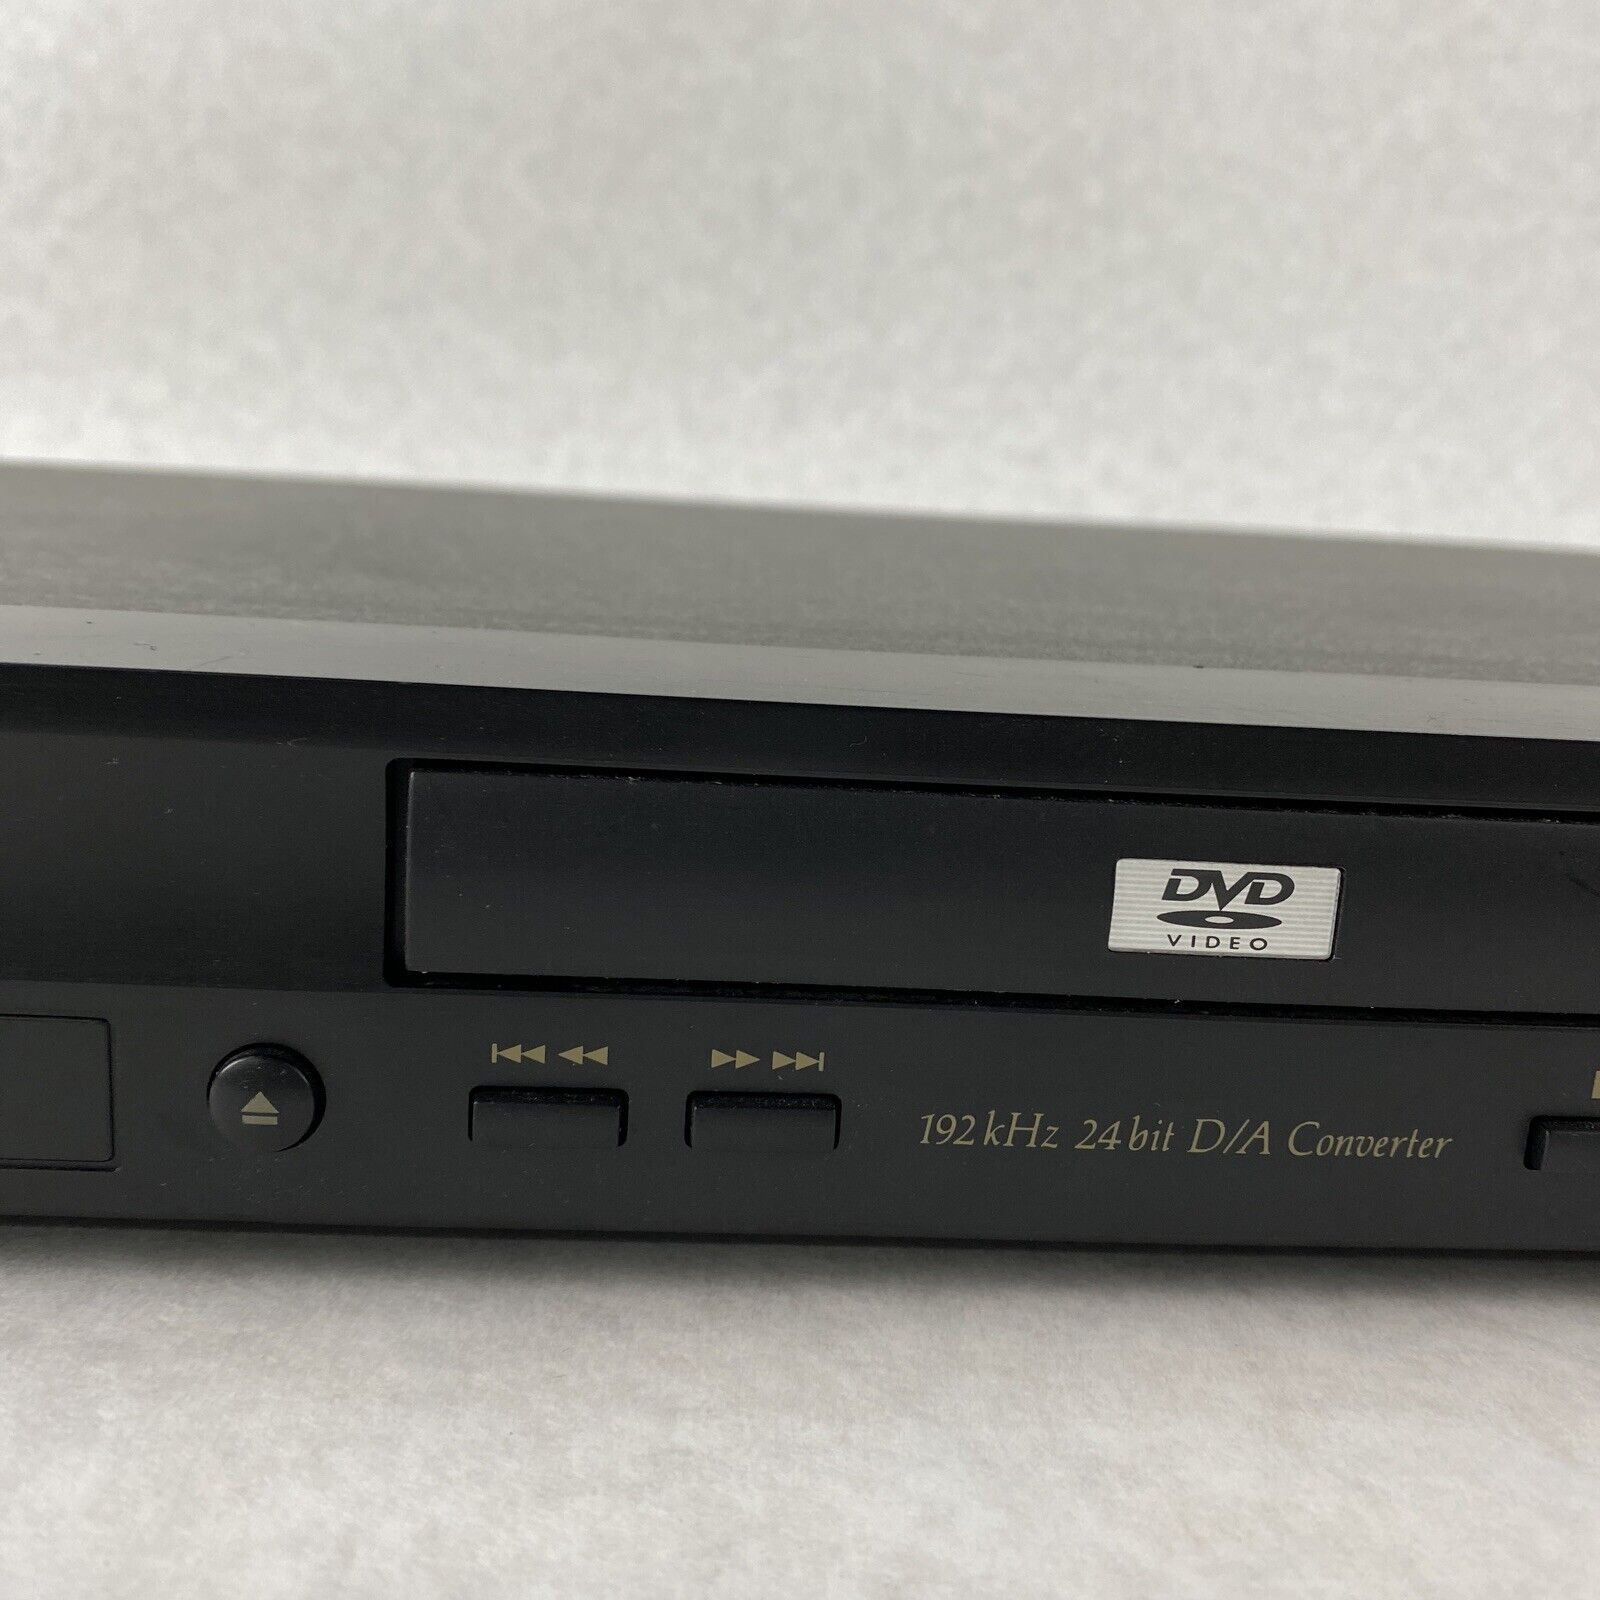 EUC Pioneer DV-440 DVD Player No Remote Tested WORKS